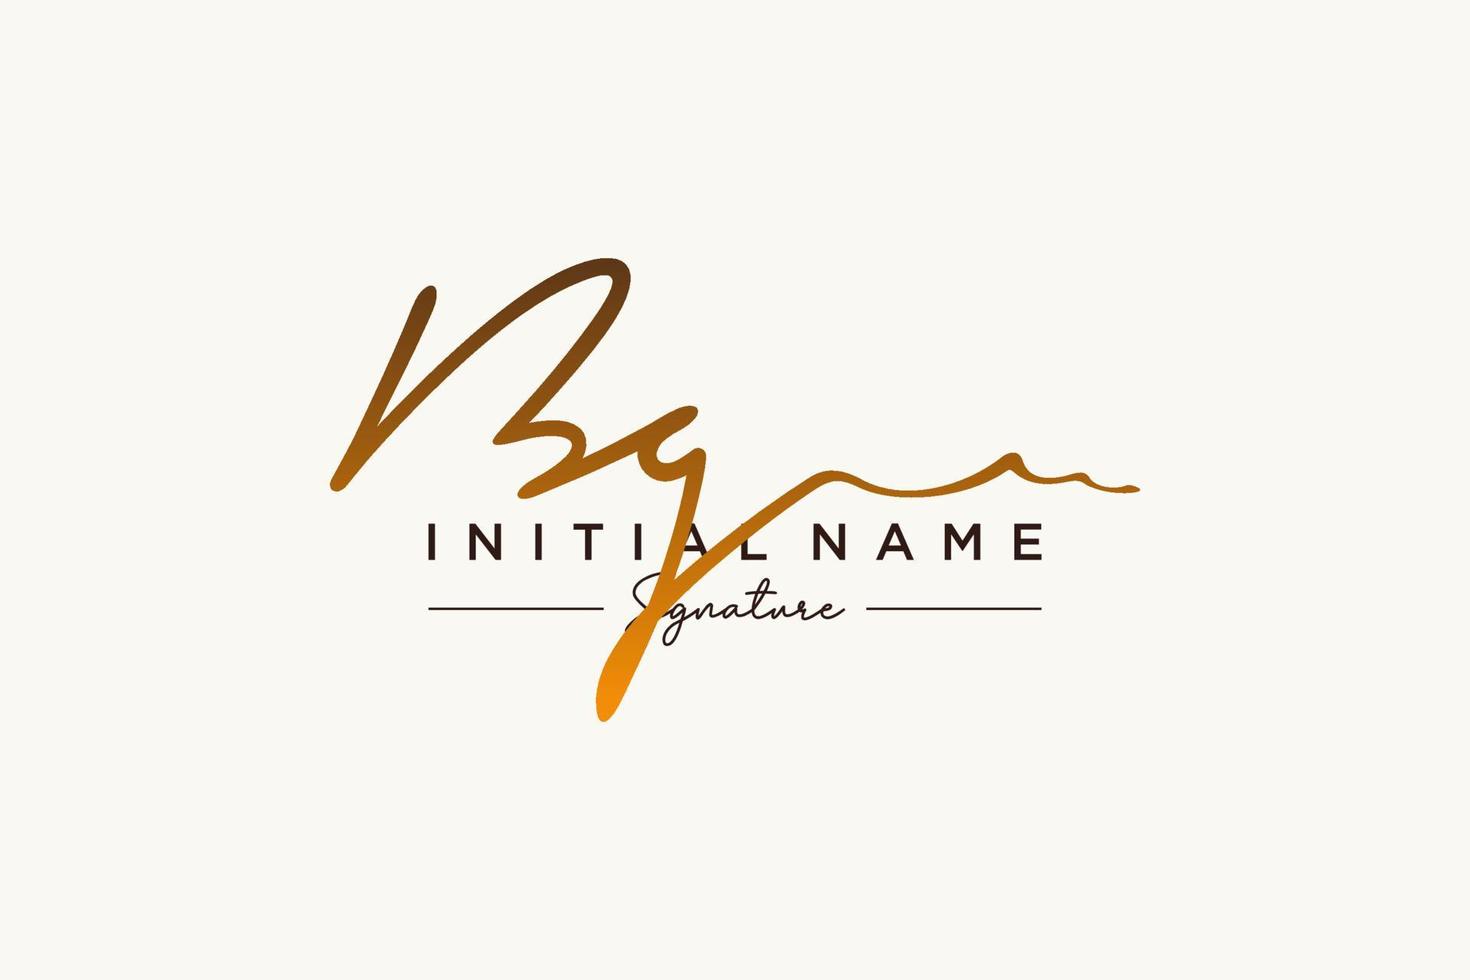 Initial BG signature logo template vector. Hand drawn Calligraphy lettering Vector illustration.